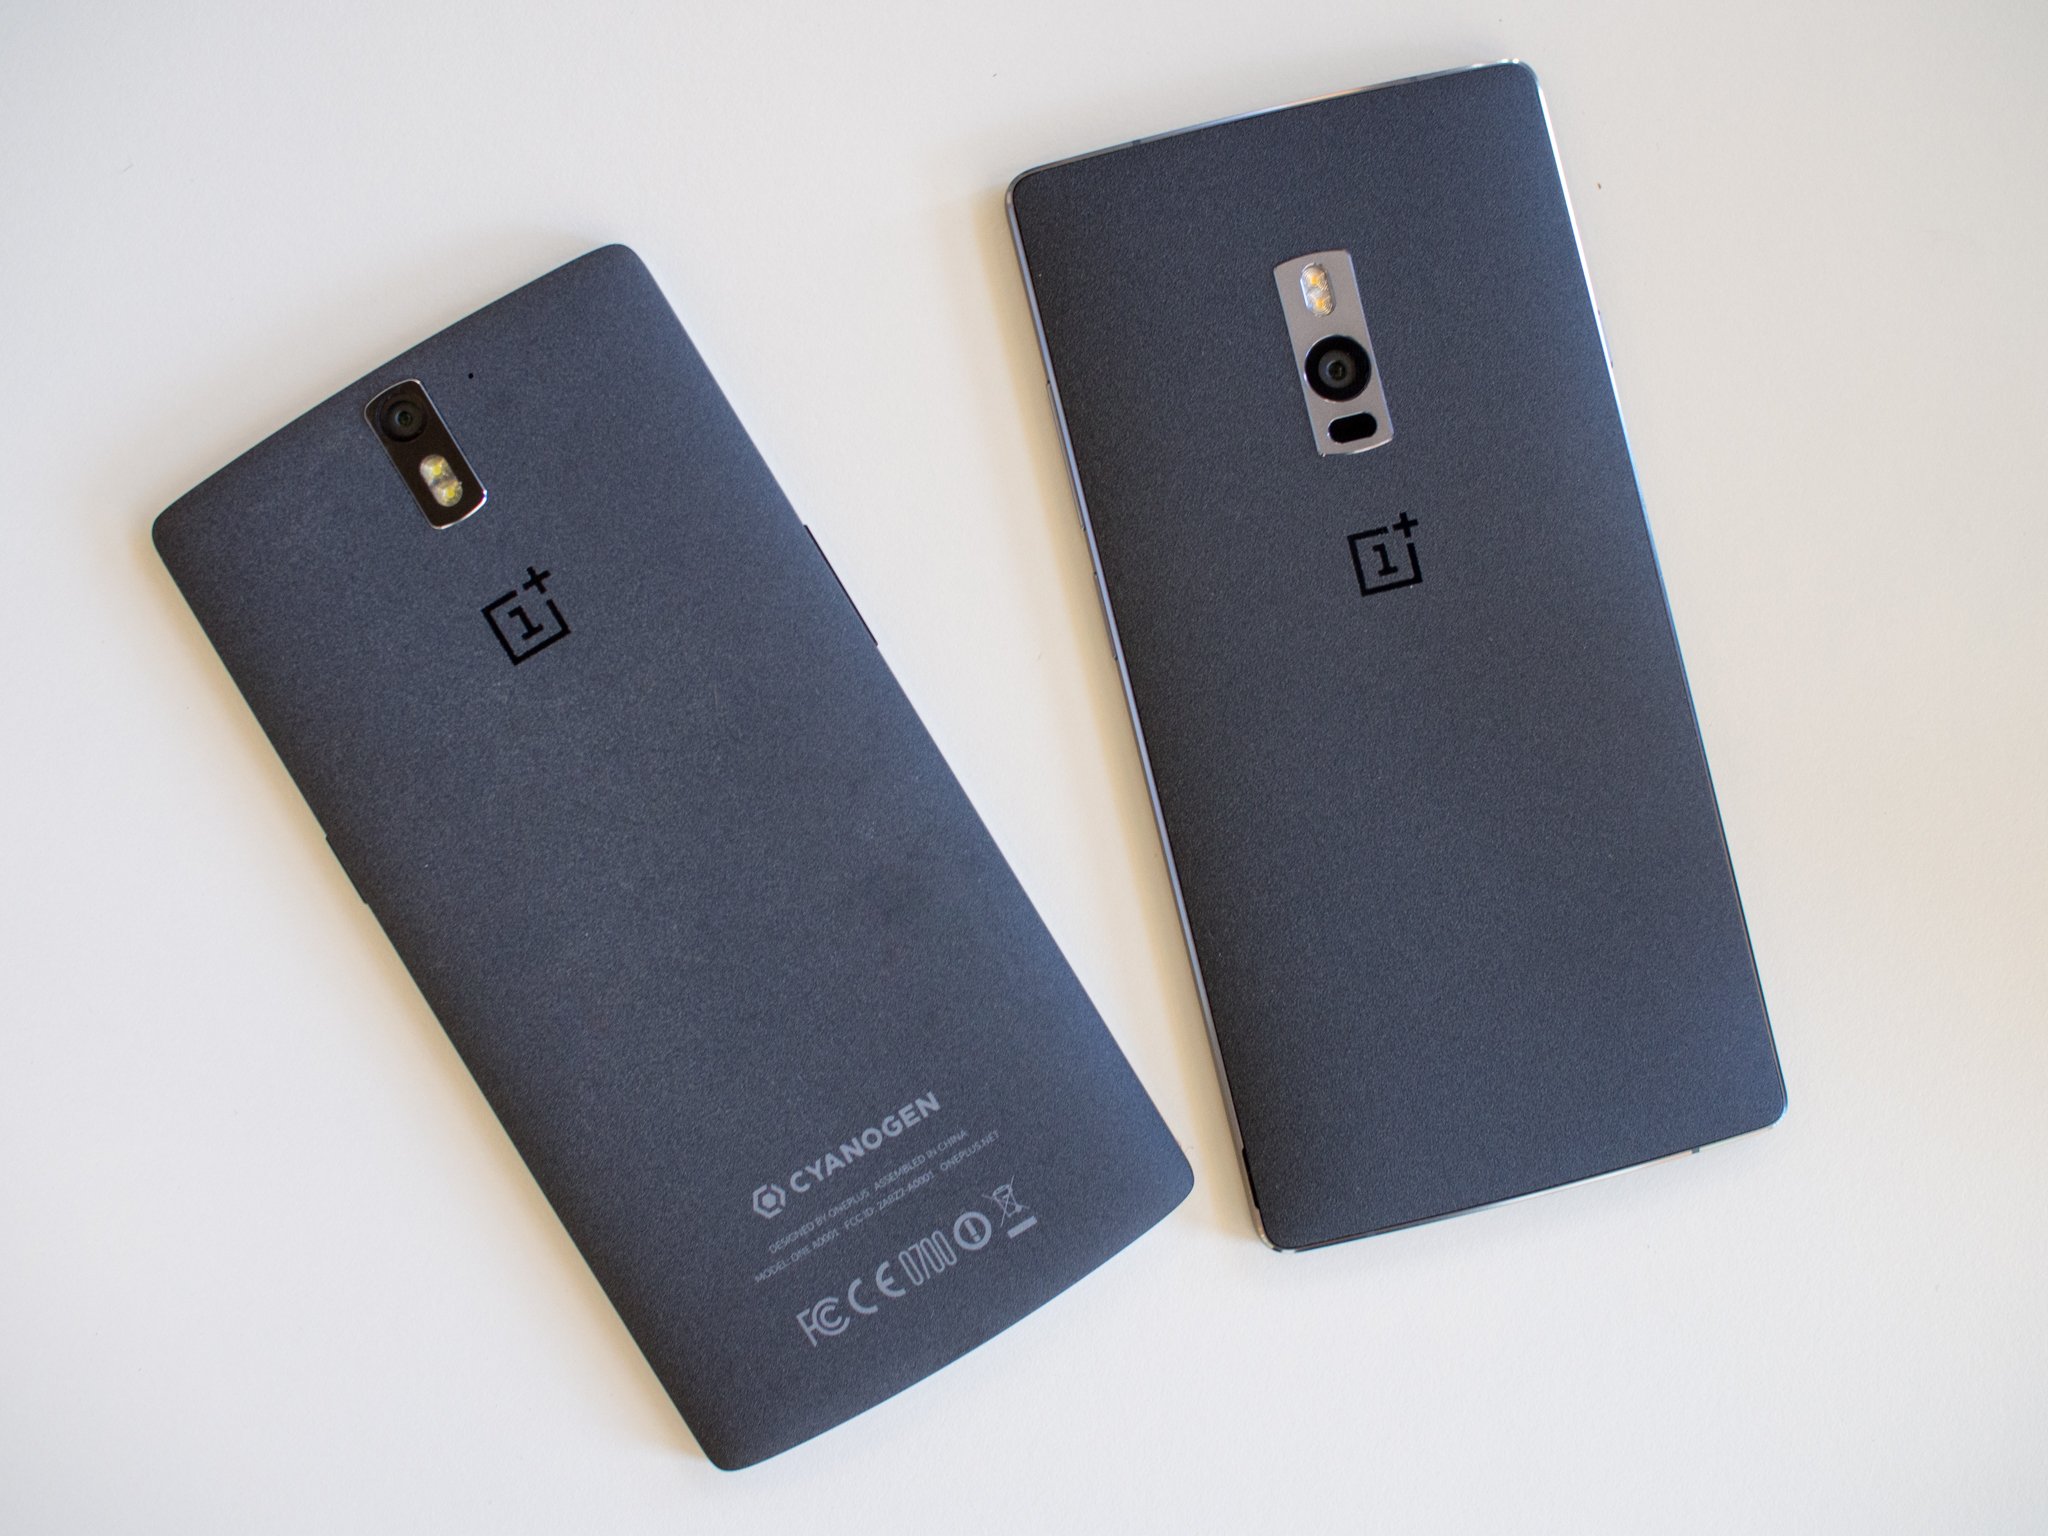 OnePlus confirms Marshmallow coming to the OnePlus One, OnePlus 2 in ...